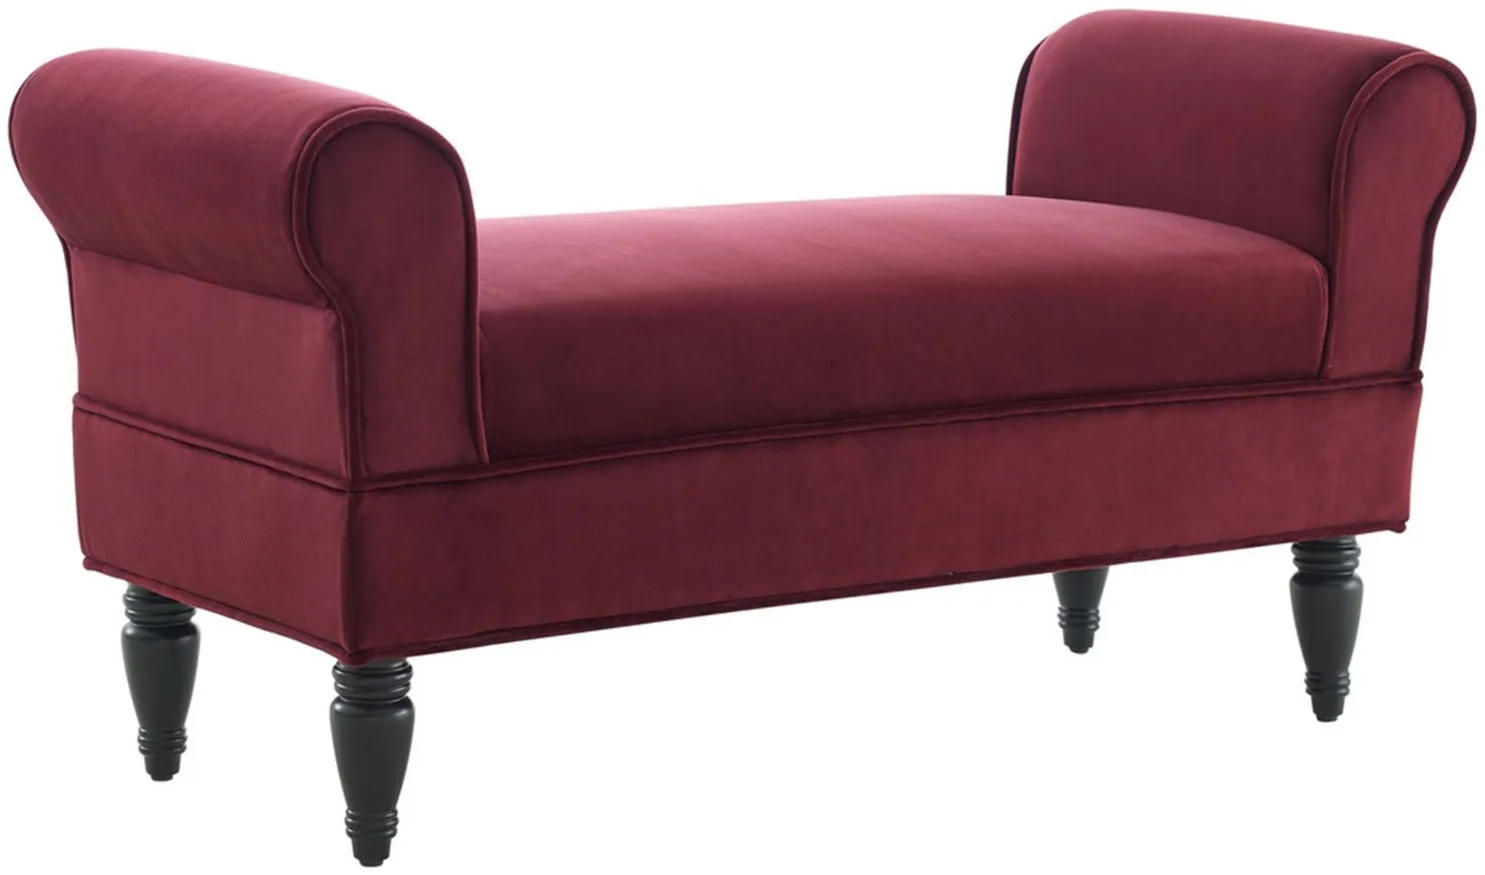 Lillian Bench in Red by Linon Home Decor